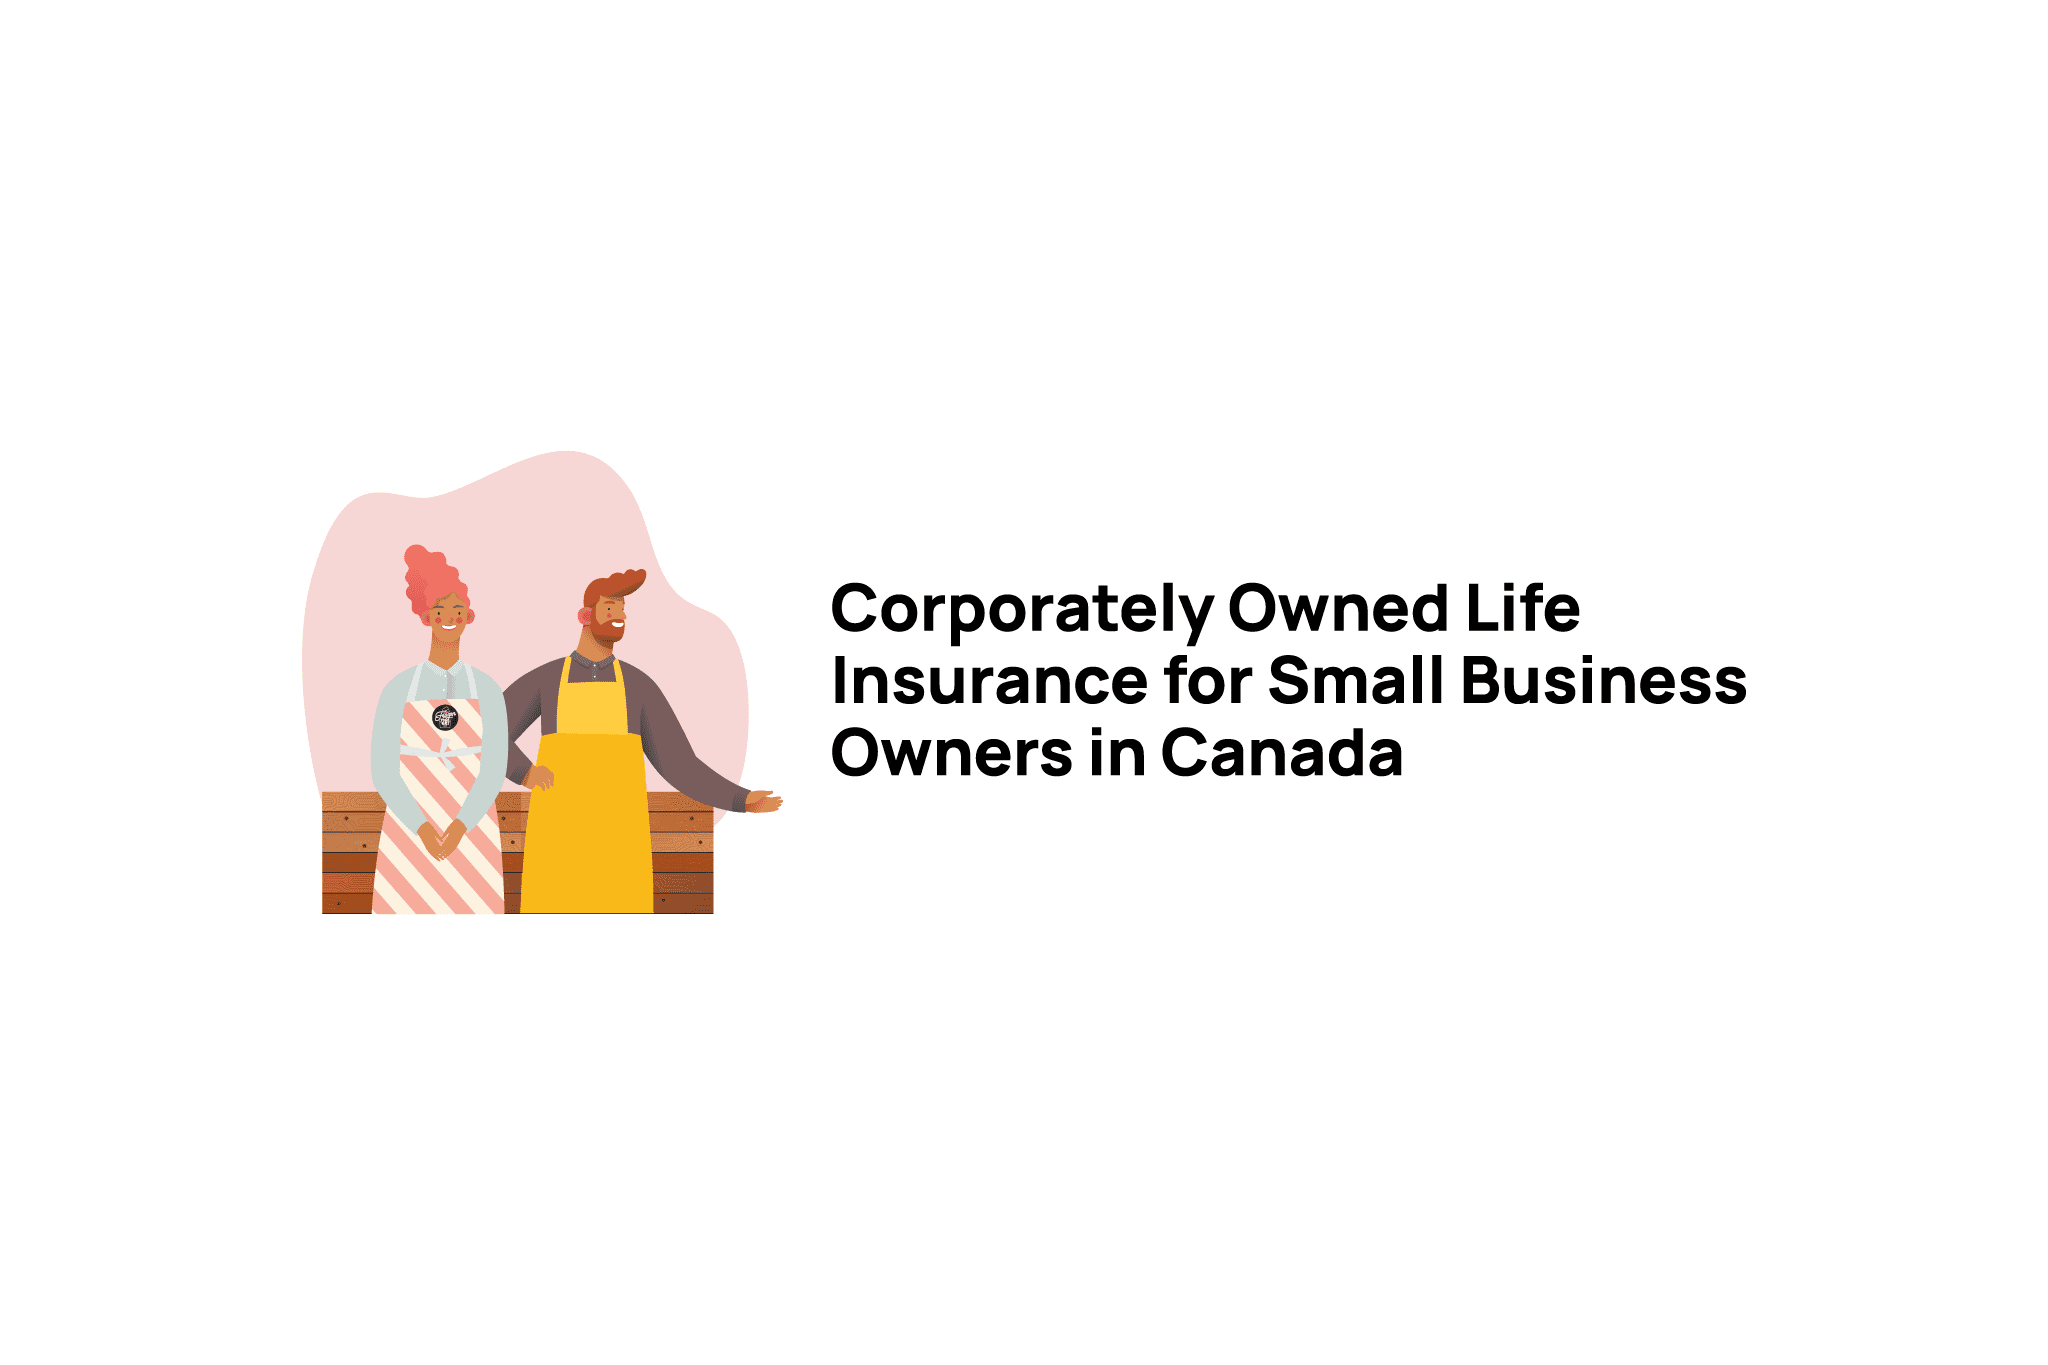 Corporately Owned Life Insurance